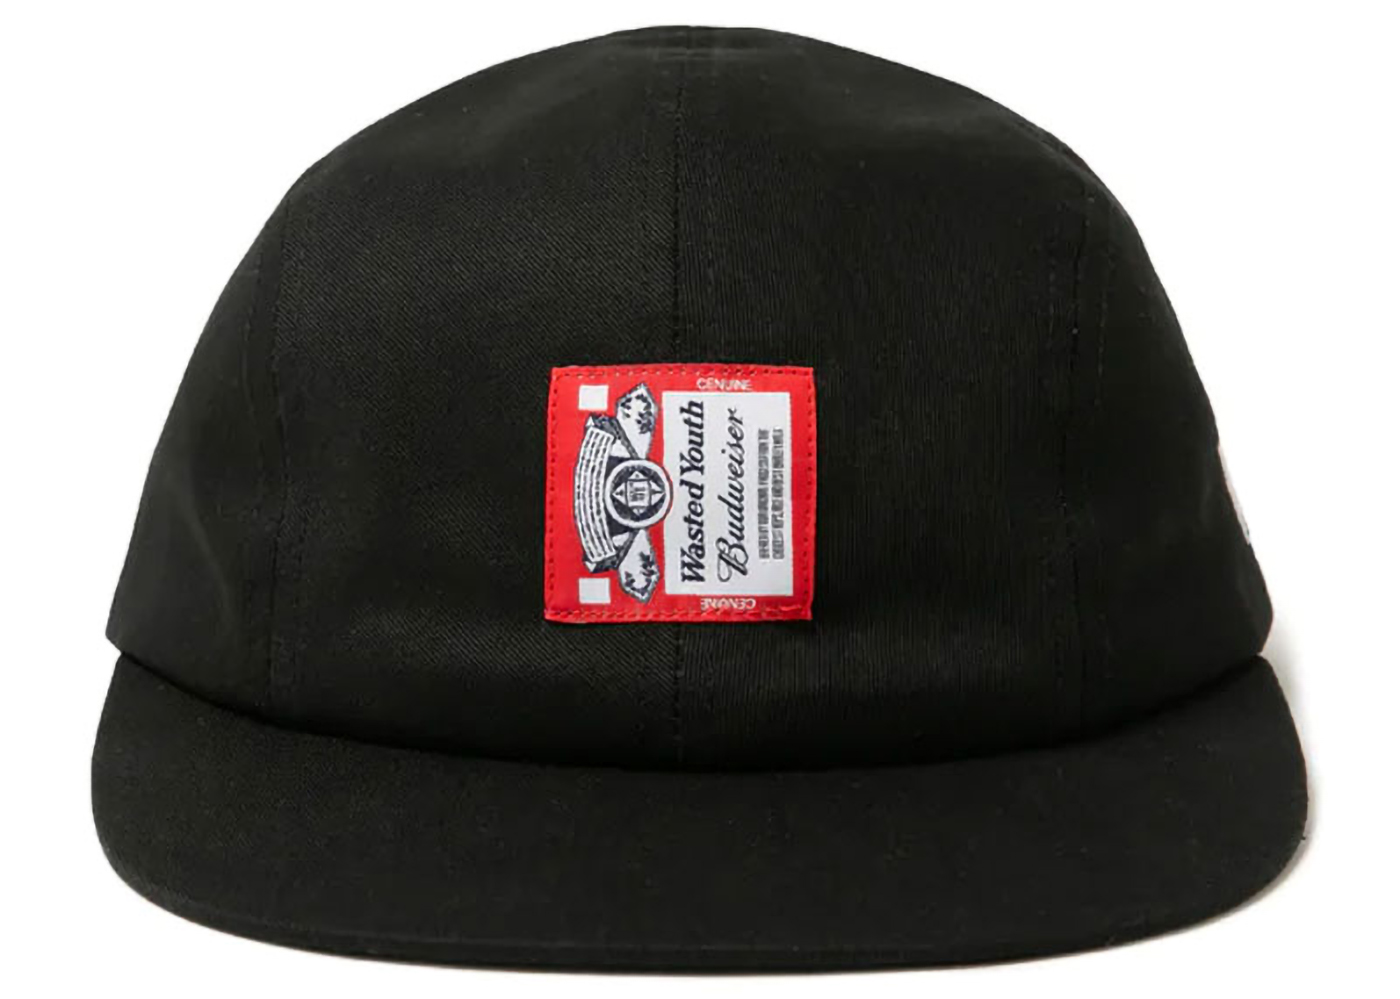 Wasted Youth x Budweiser 4 Panel Cap Black